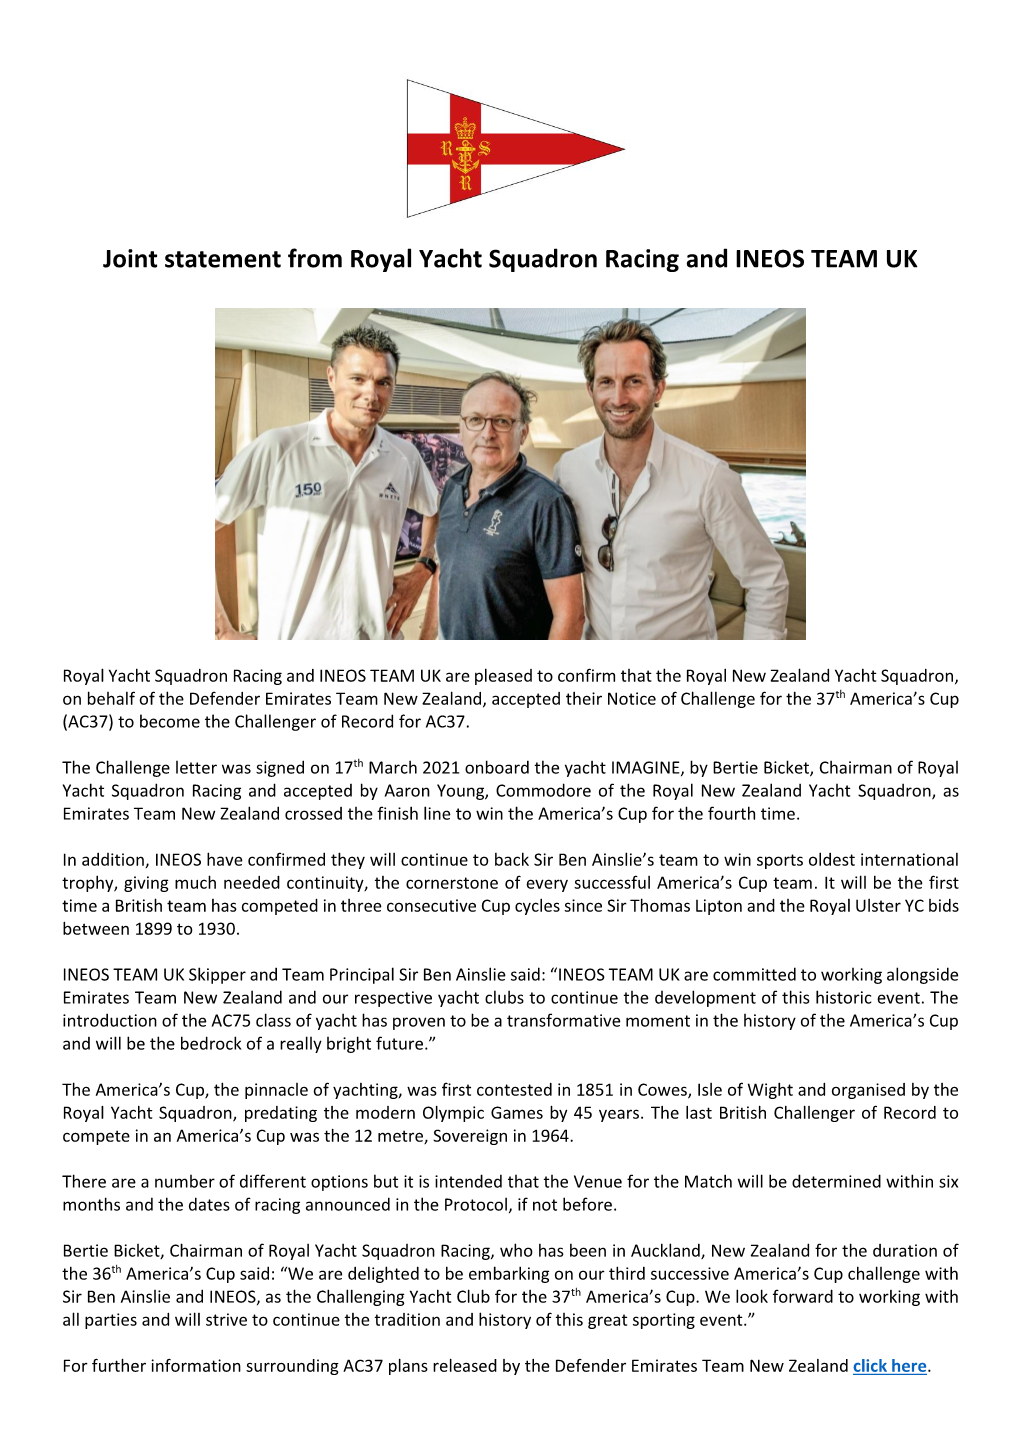 Joint Statement from Royal Yacht Squadron Racing and INEOS TEAM UK